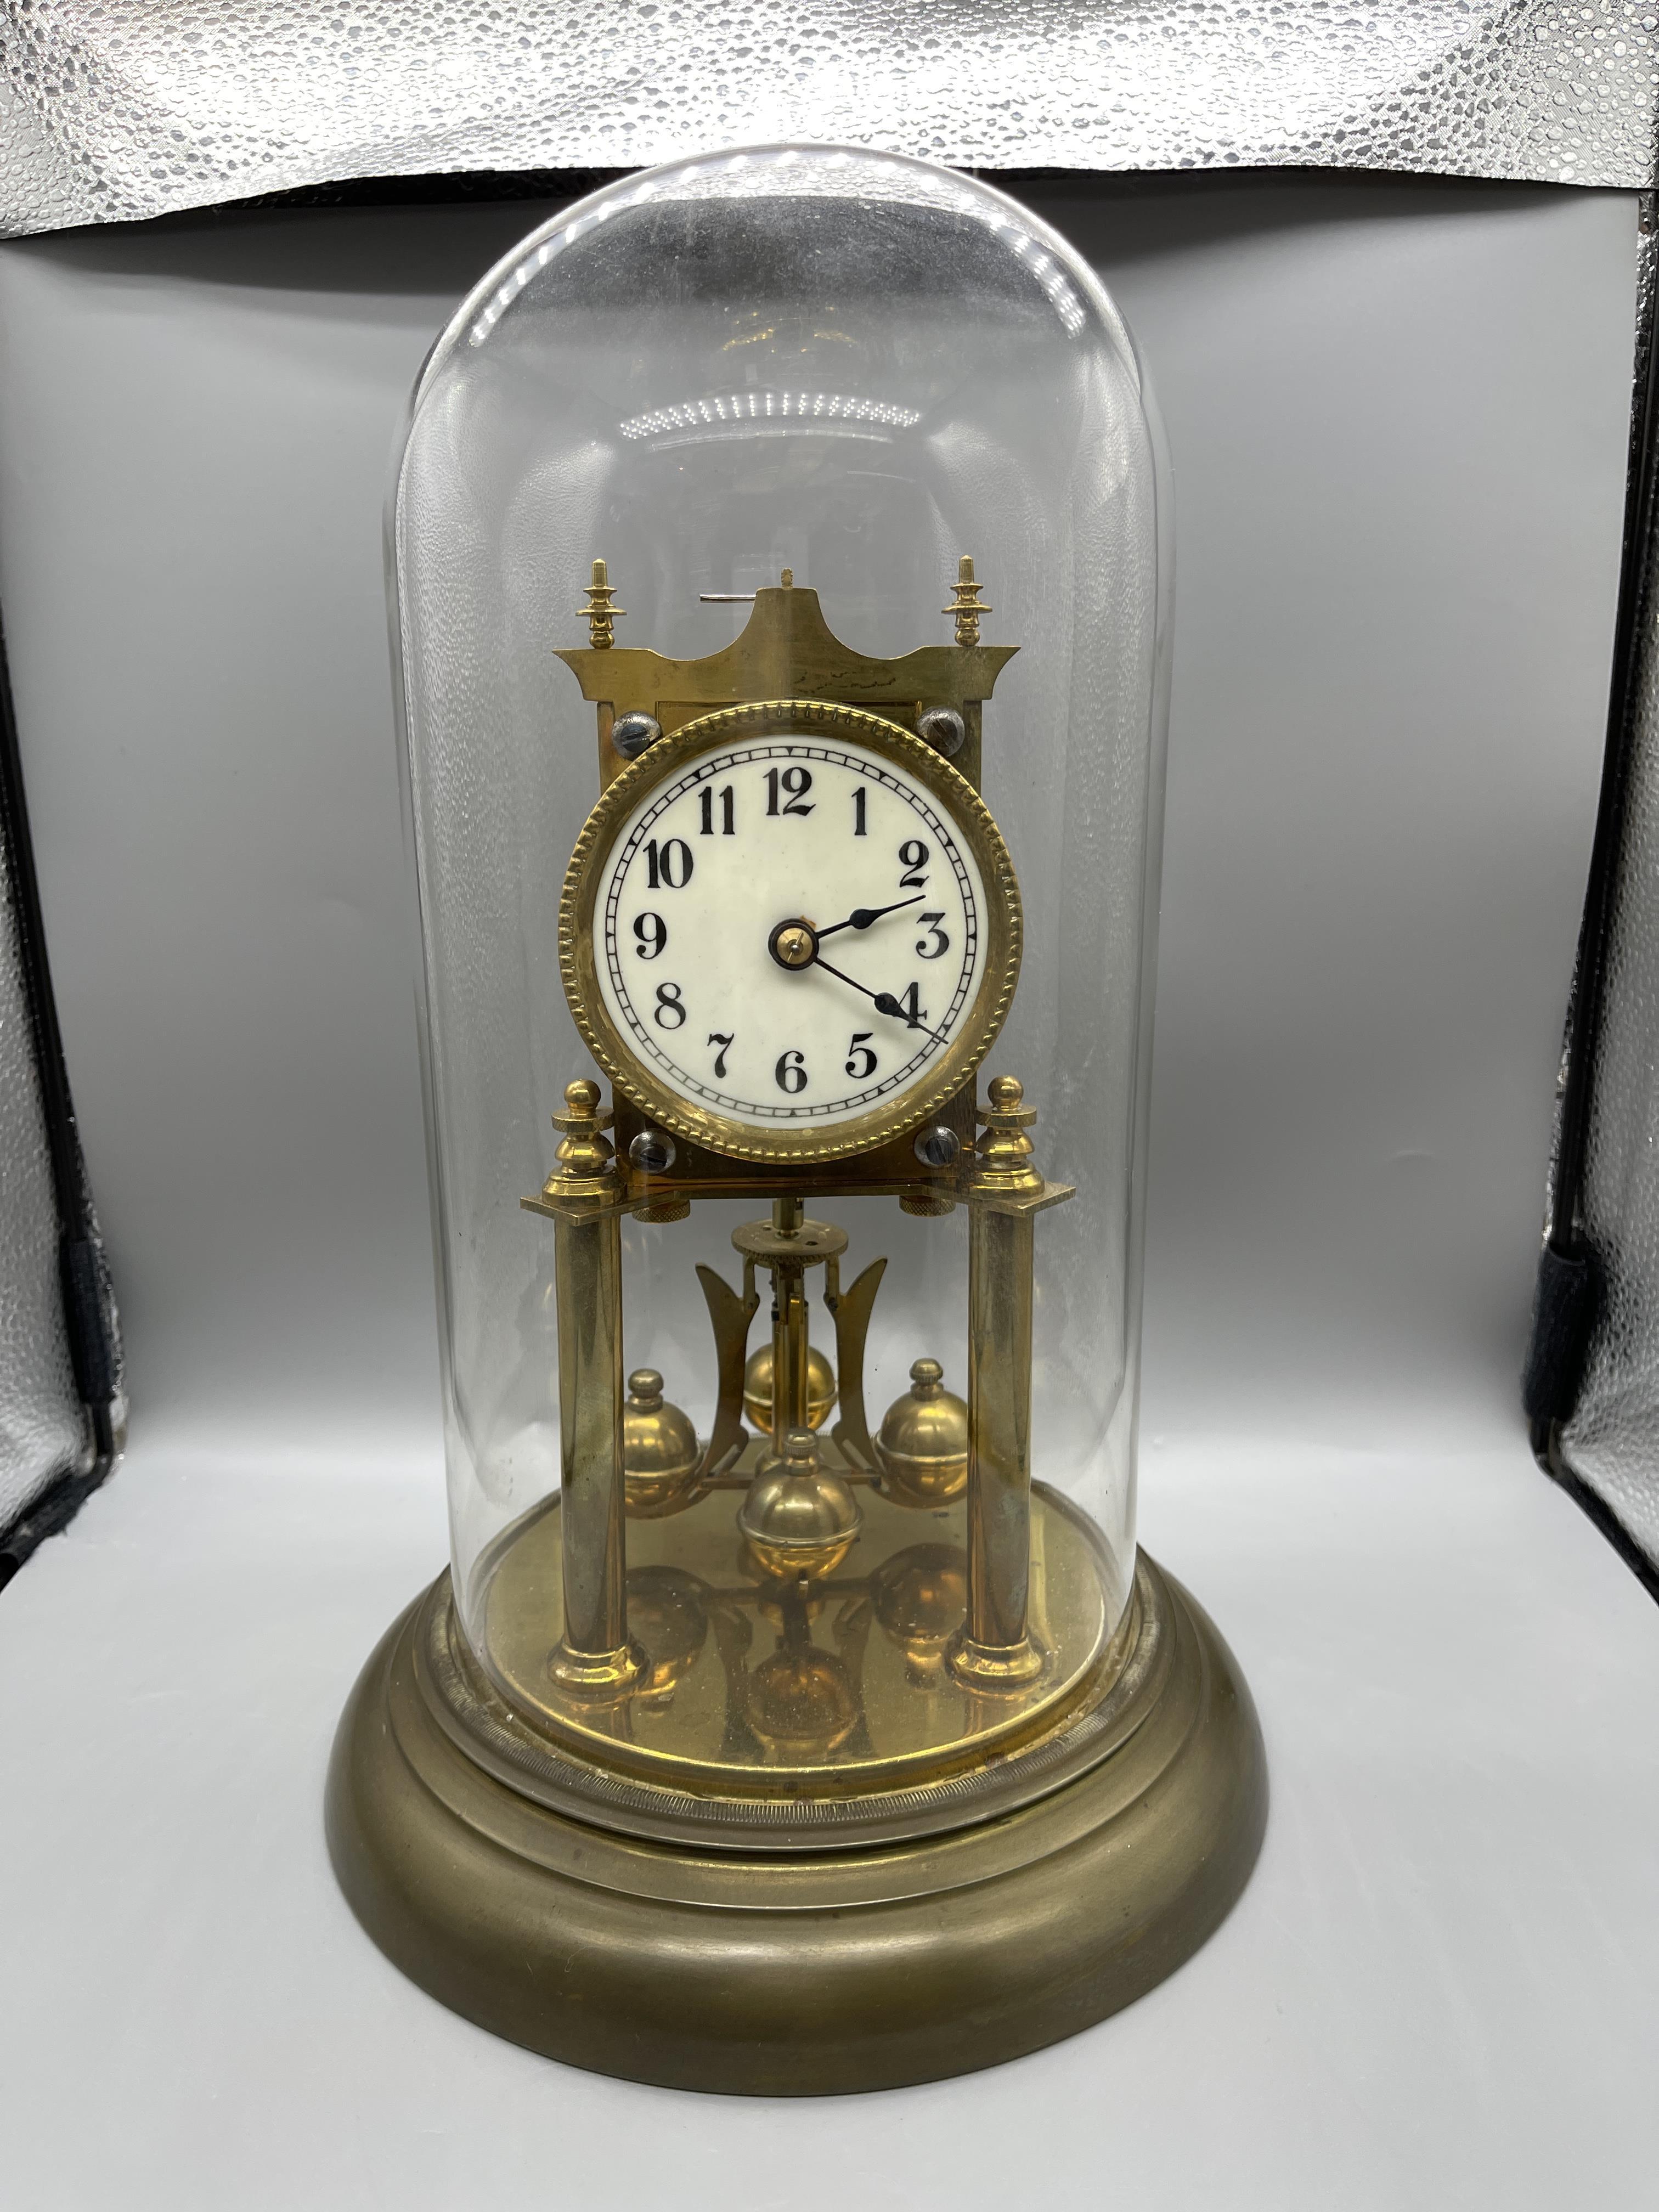 Glass Dome Clock - Image 3 of 11